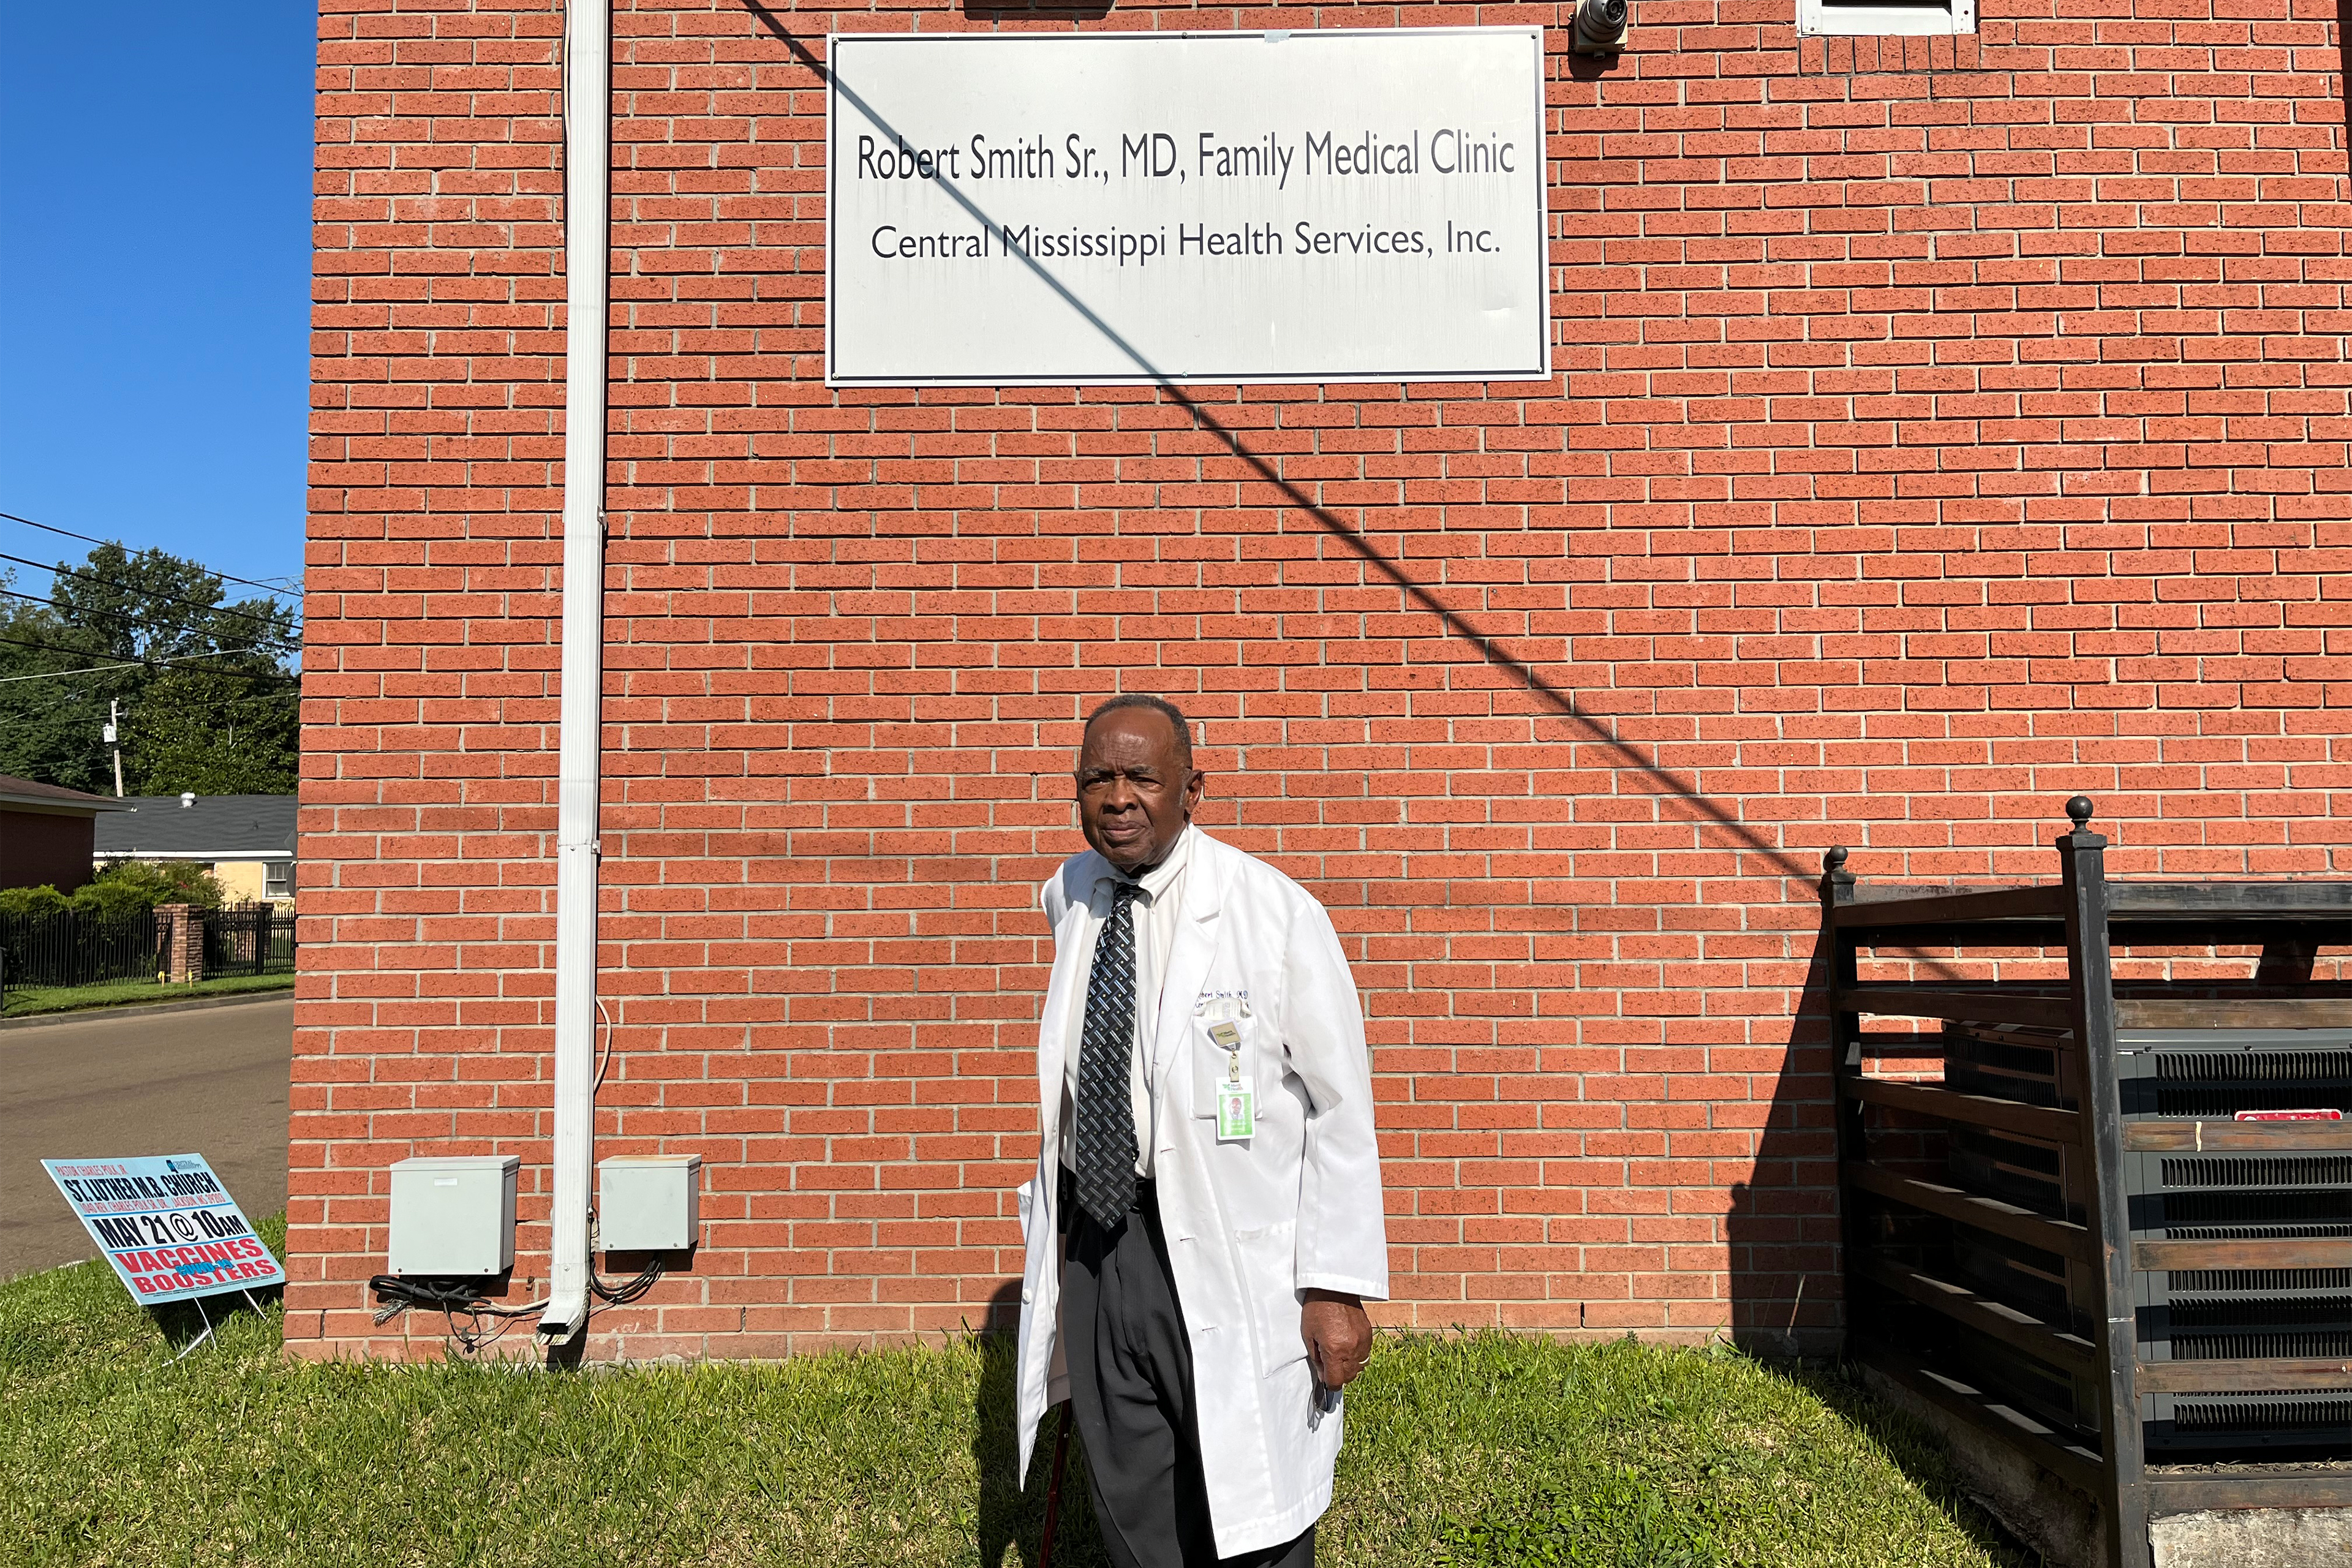 One photo shows Dr. Robert Smith standing outside the Central Mississippi Health Services building.